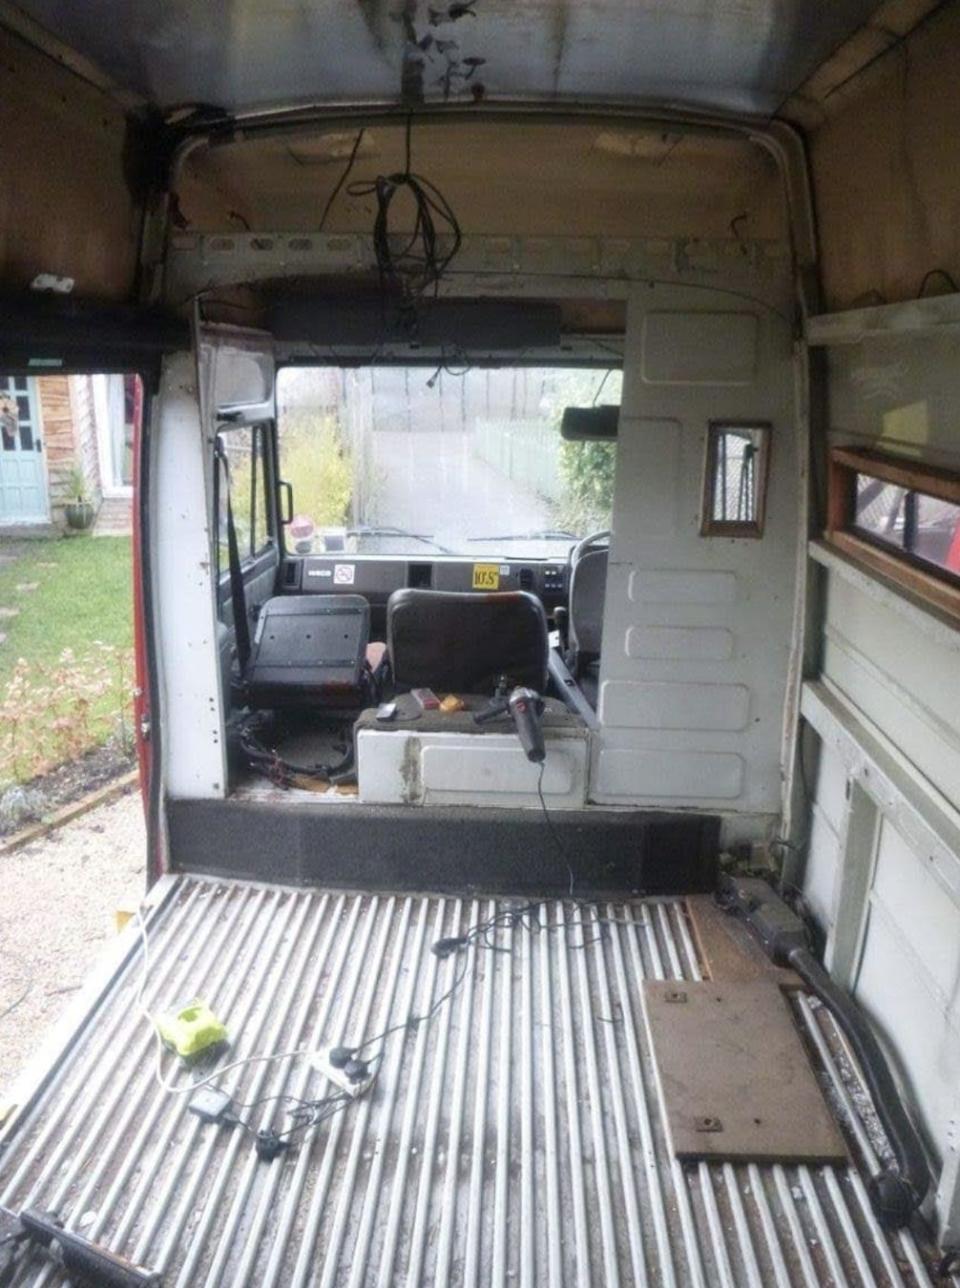 Inside Jess Branton and Dave Smith's firetruck before they converted it.